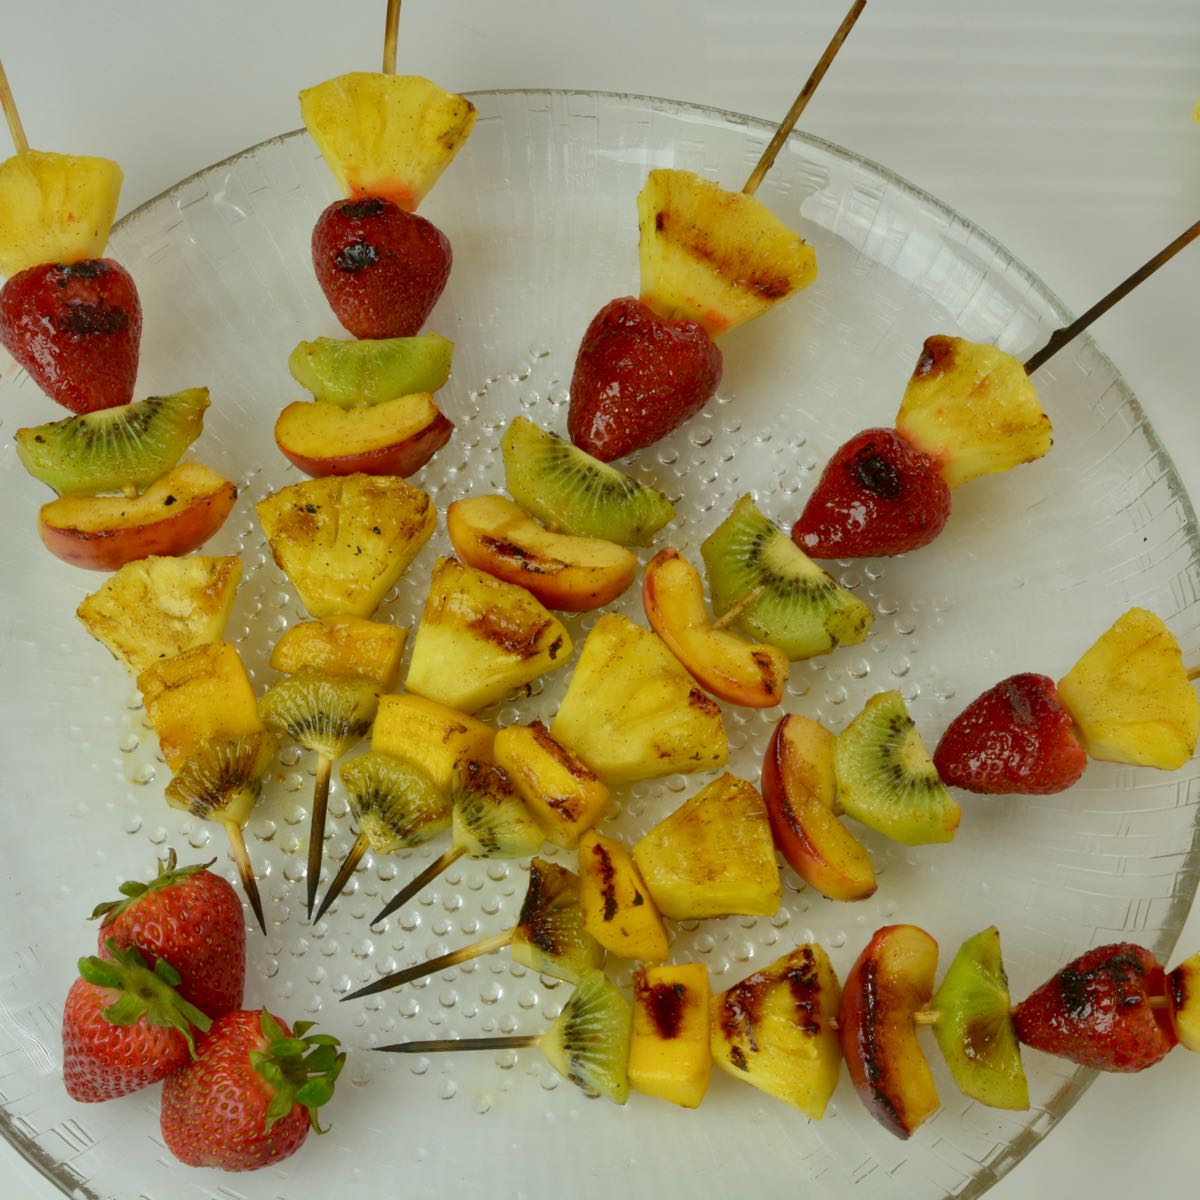 A platter of Grilled Fruit Skewers with Honey Cinnamon Glaze.